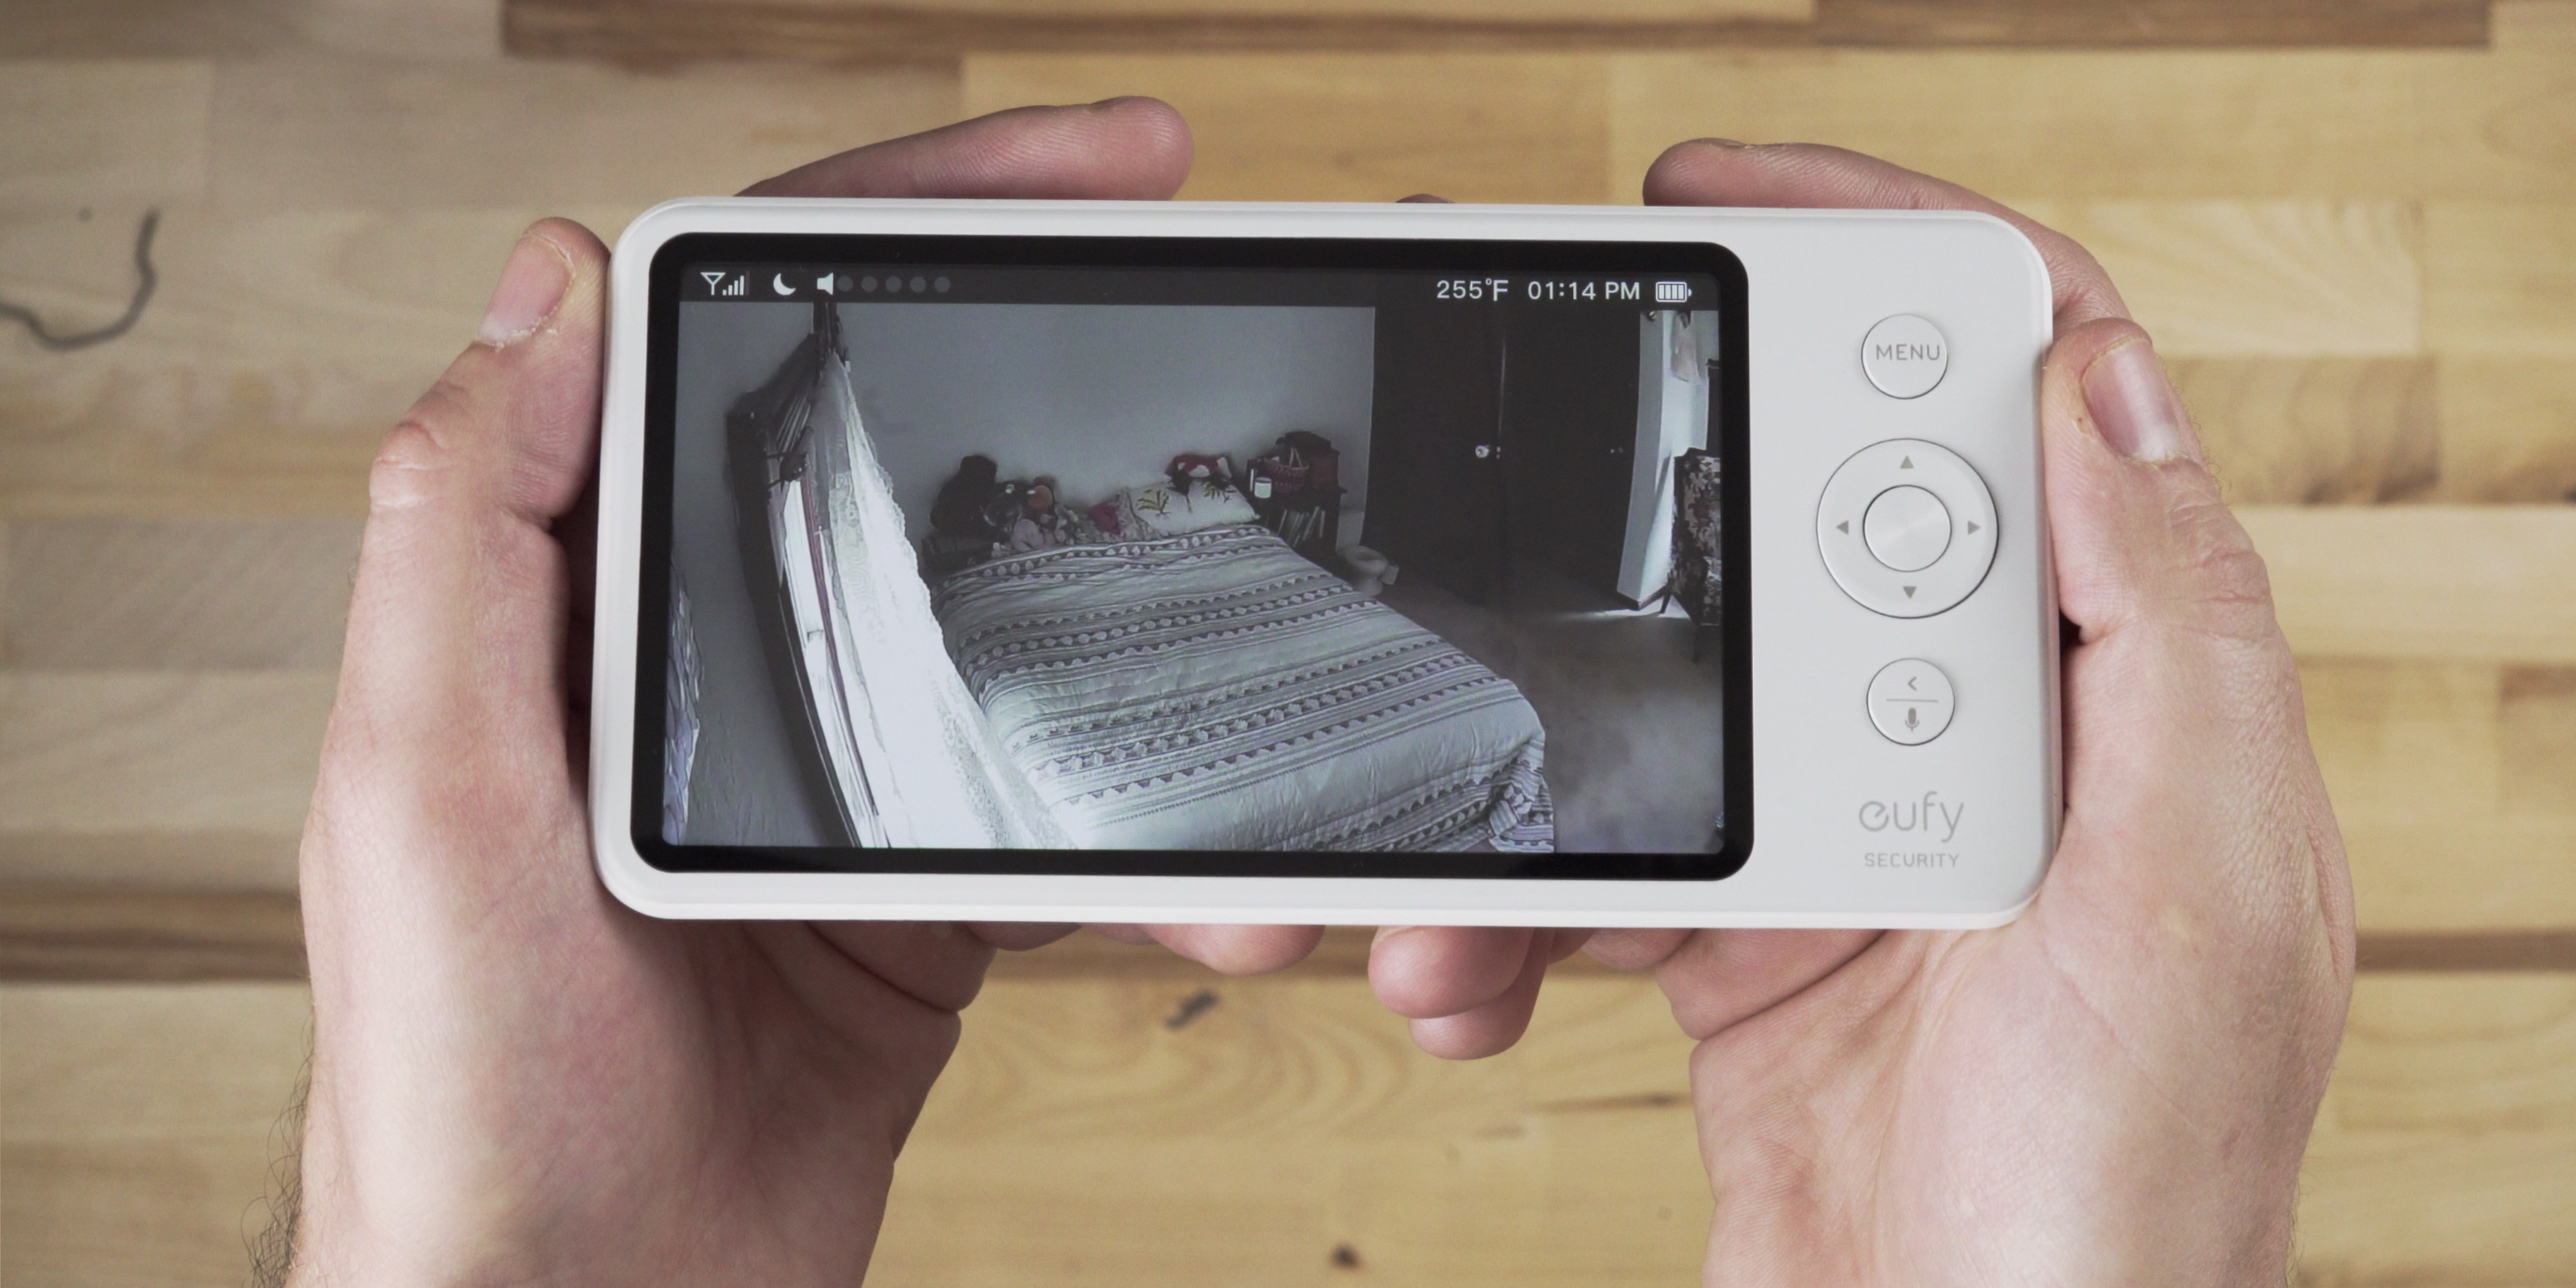 eufy security spaceview baby monitor review